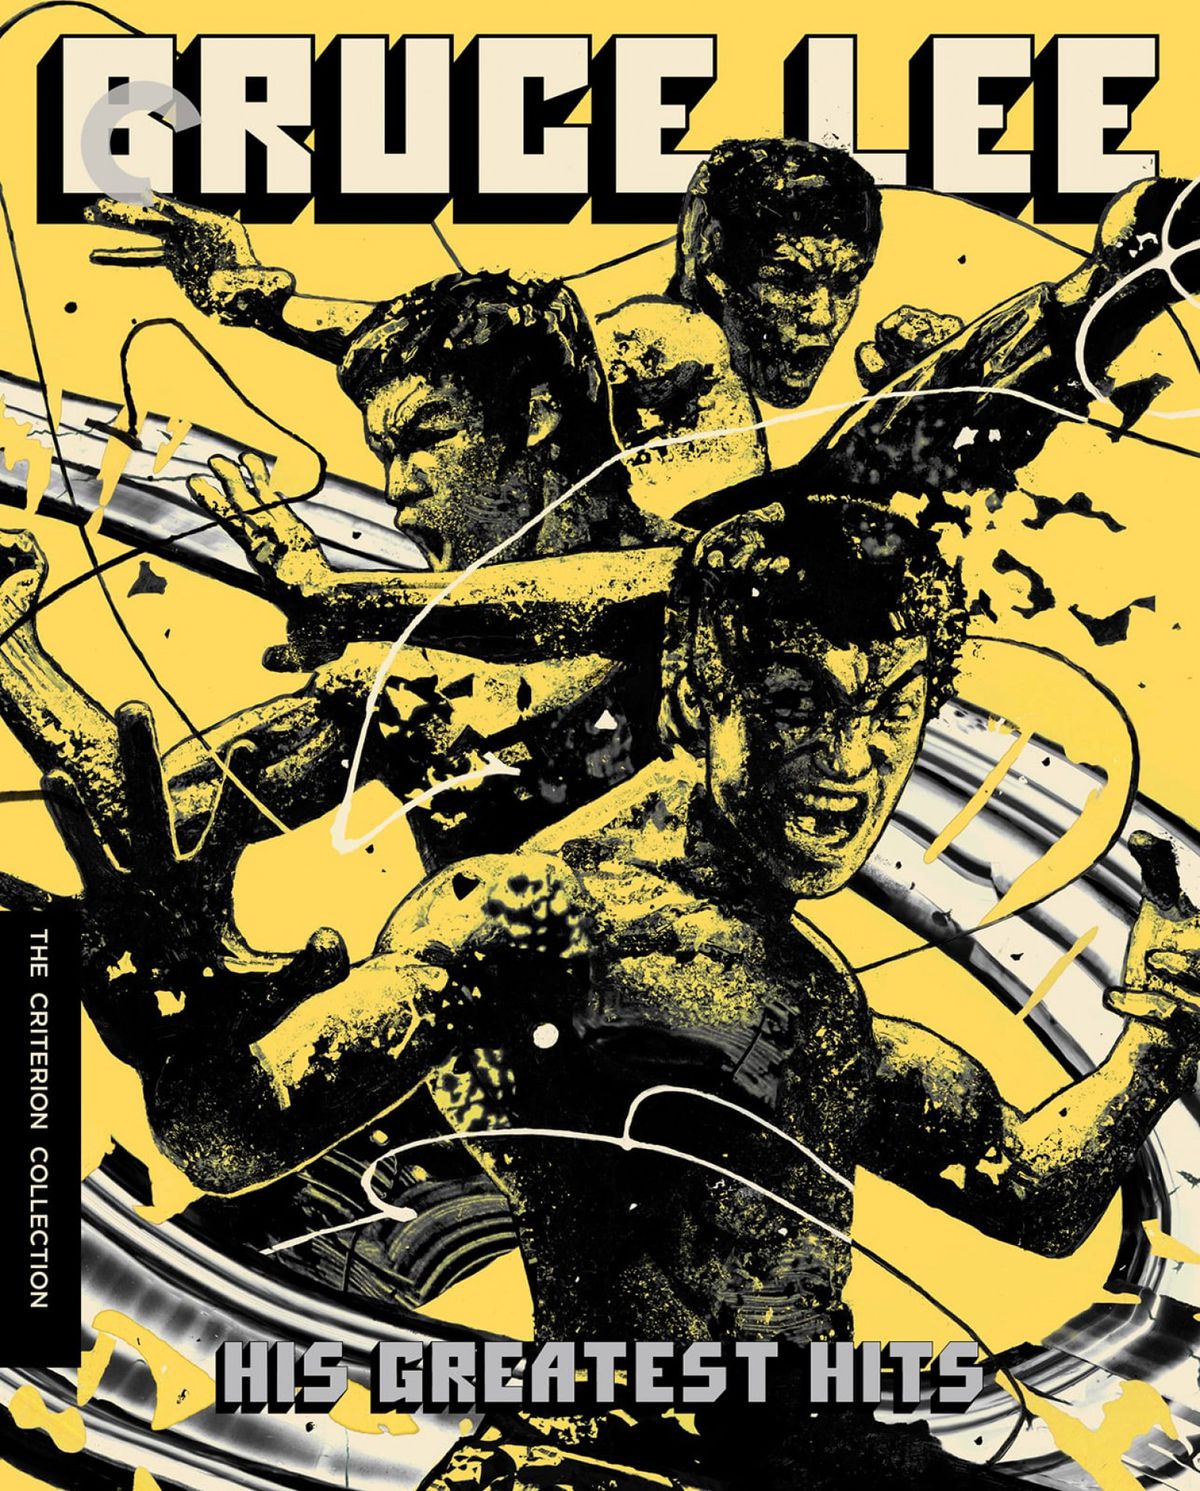 Cover art for the Criterion Collection box set of Bruce Lee: His Greatest Hits.